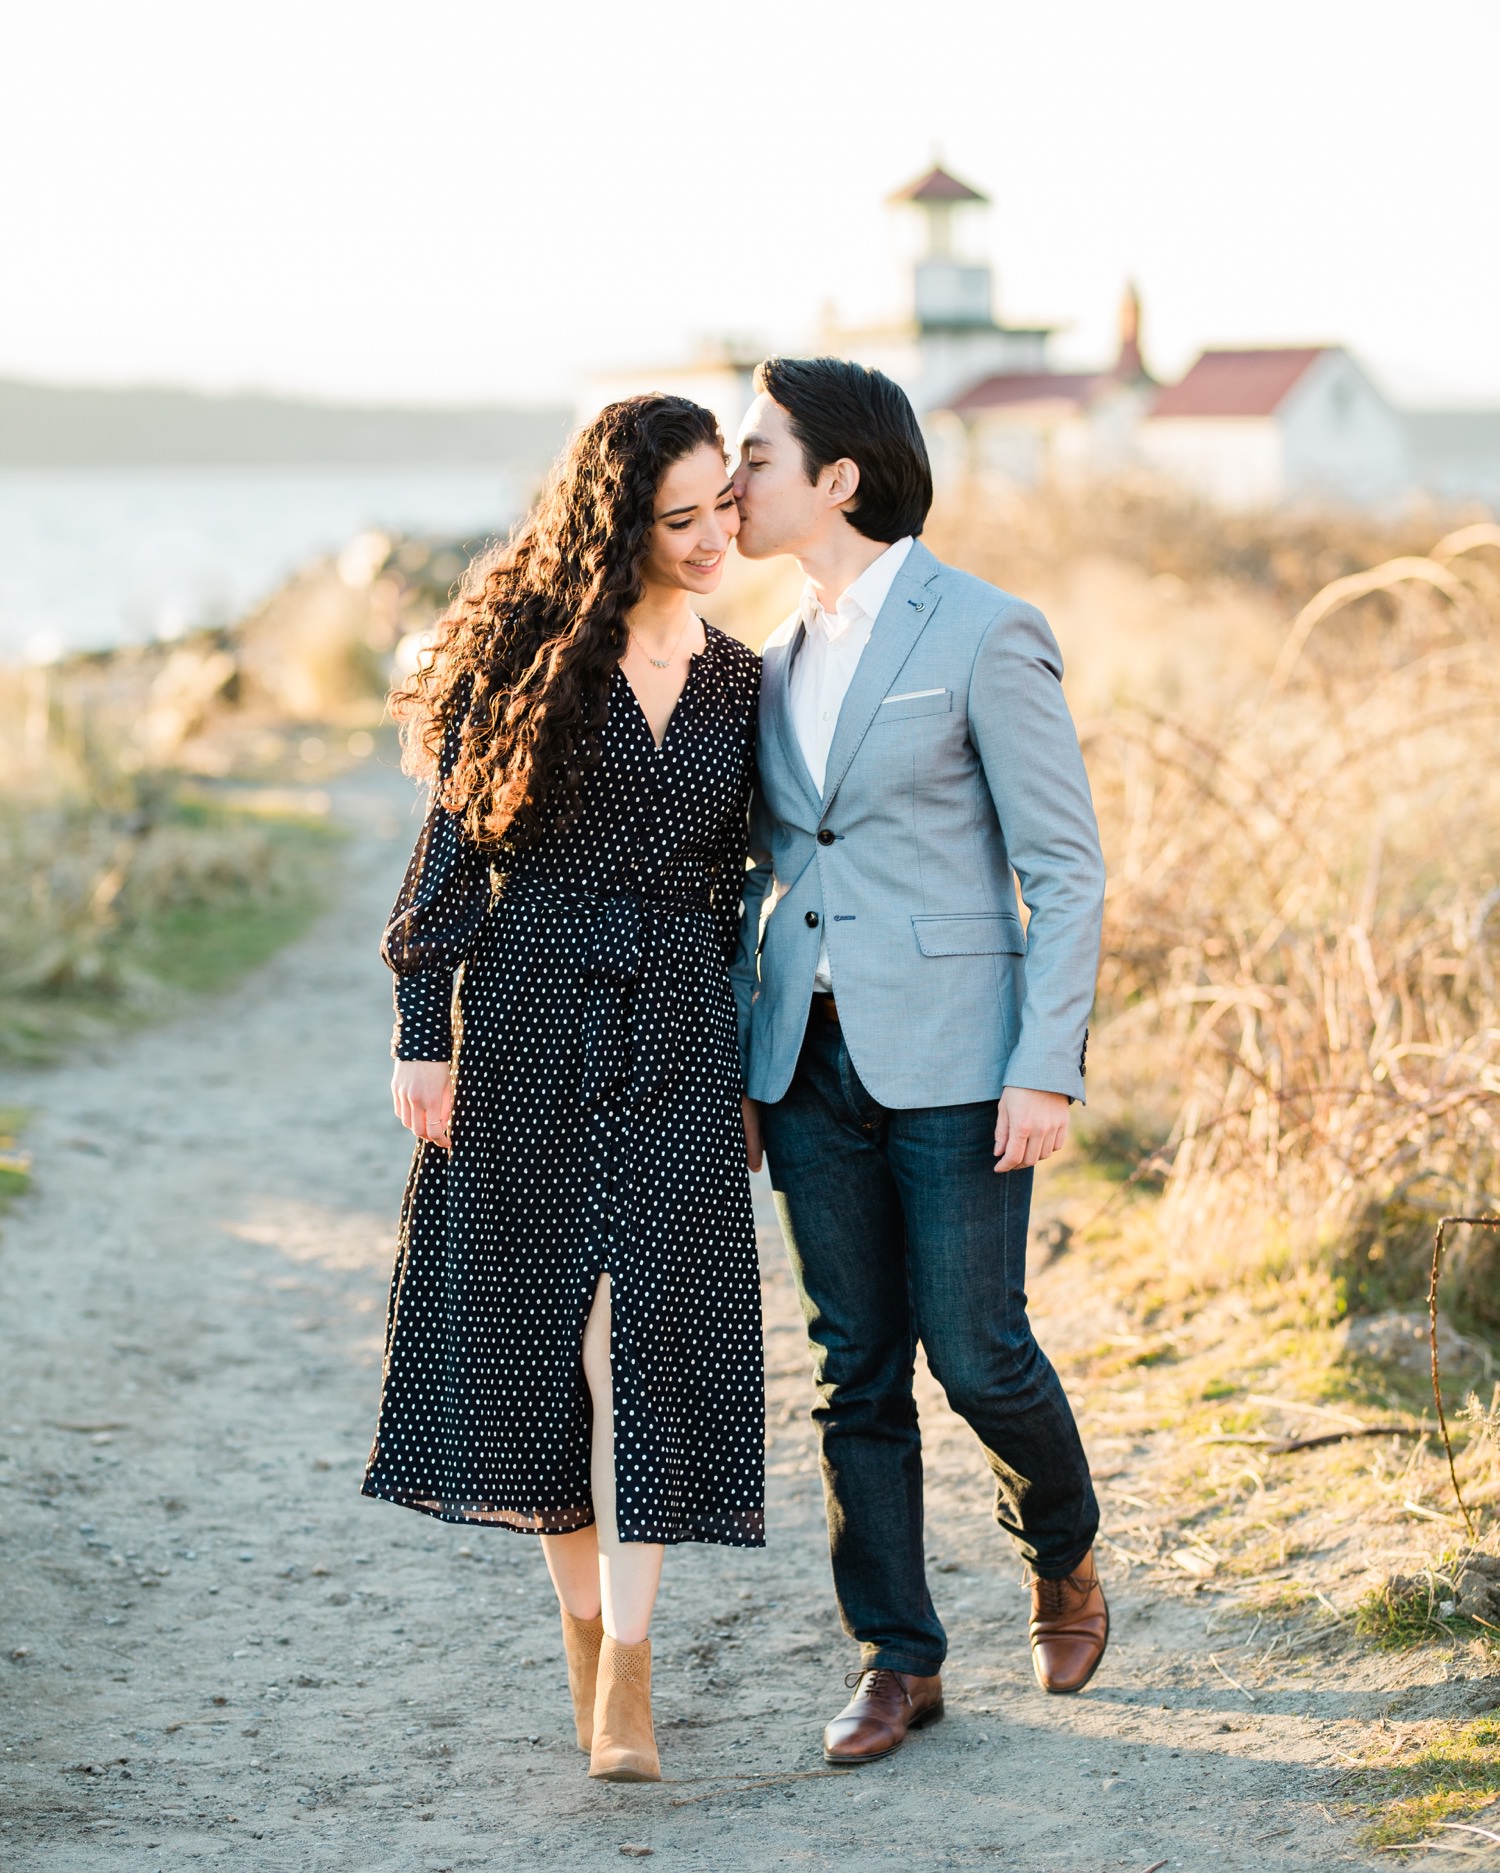 Romantic Engagement Photos at Discovery Park in Seattle. Cameron Zegers Photography